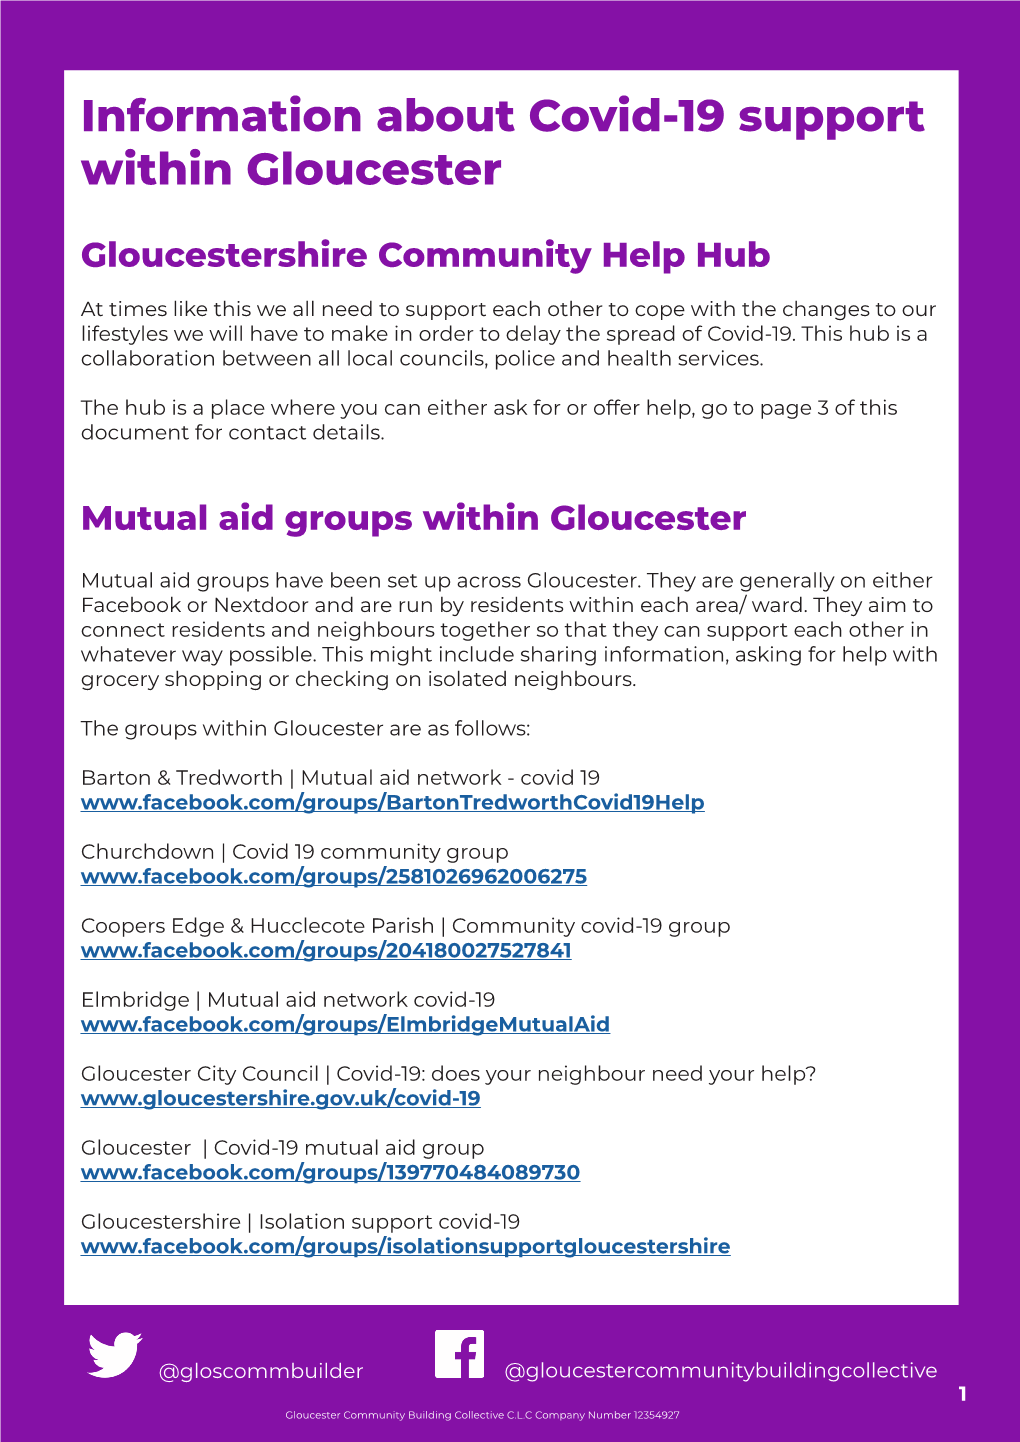 Information About Covid-19 Support Within Gloucester